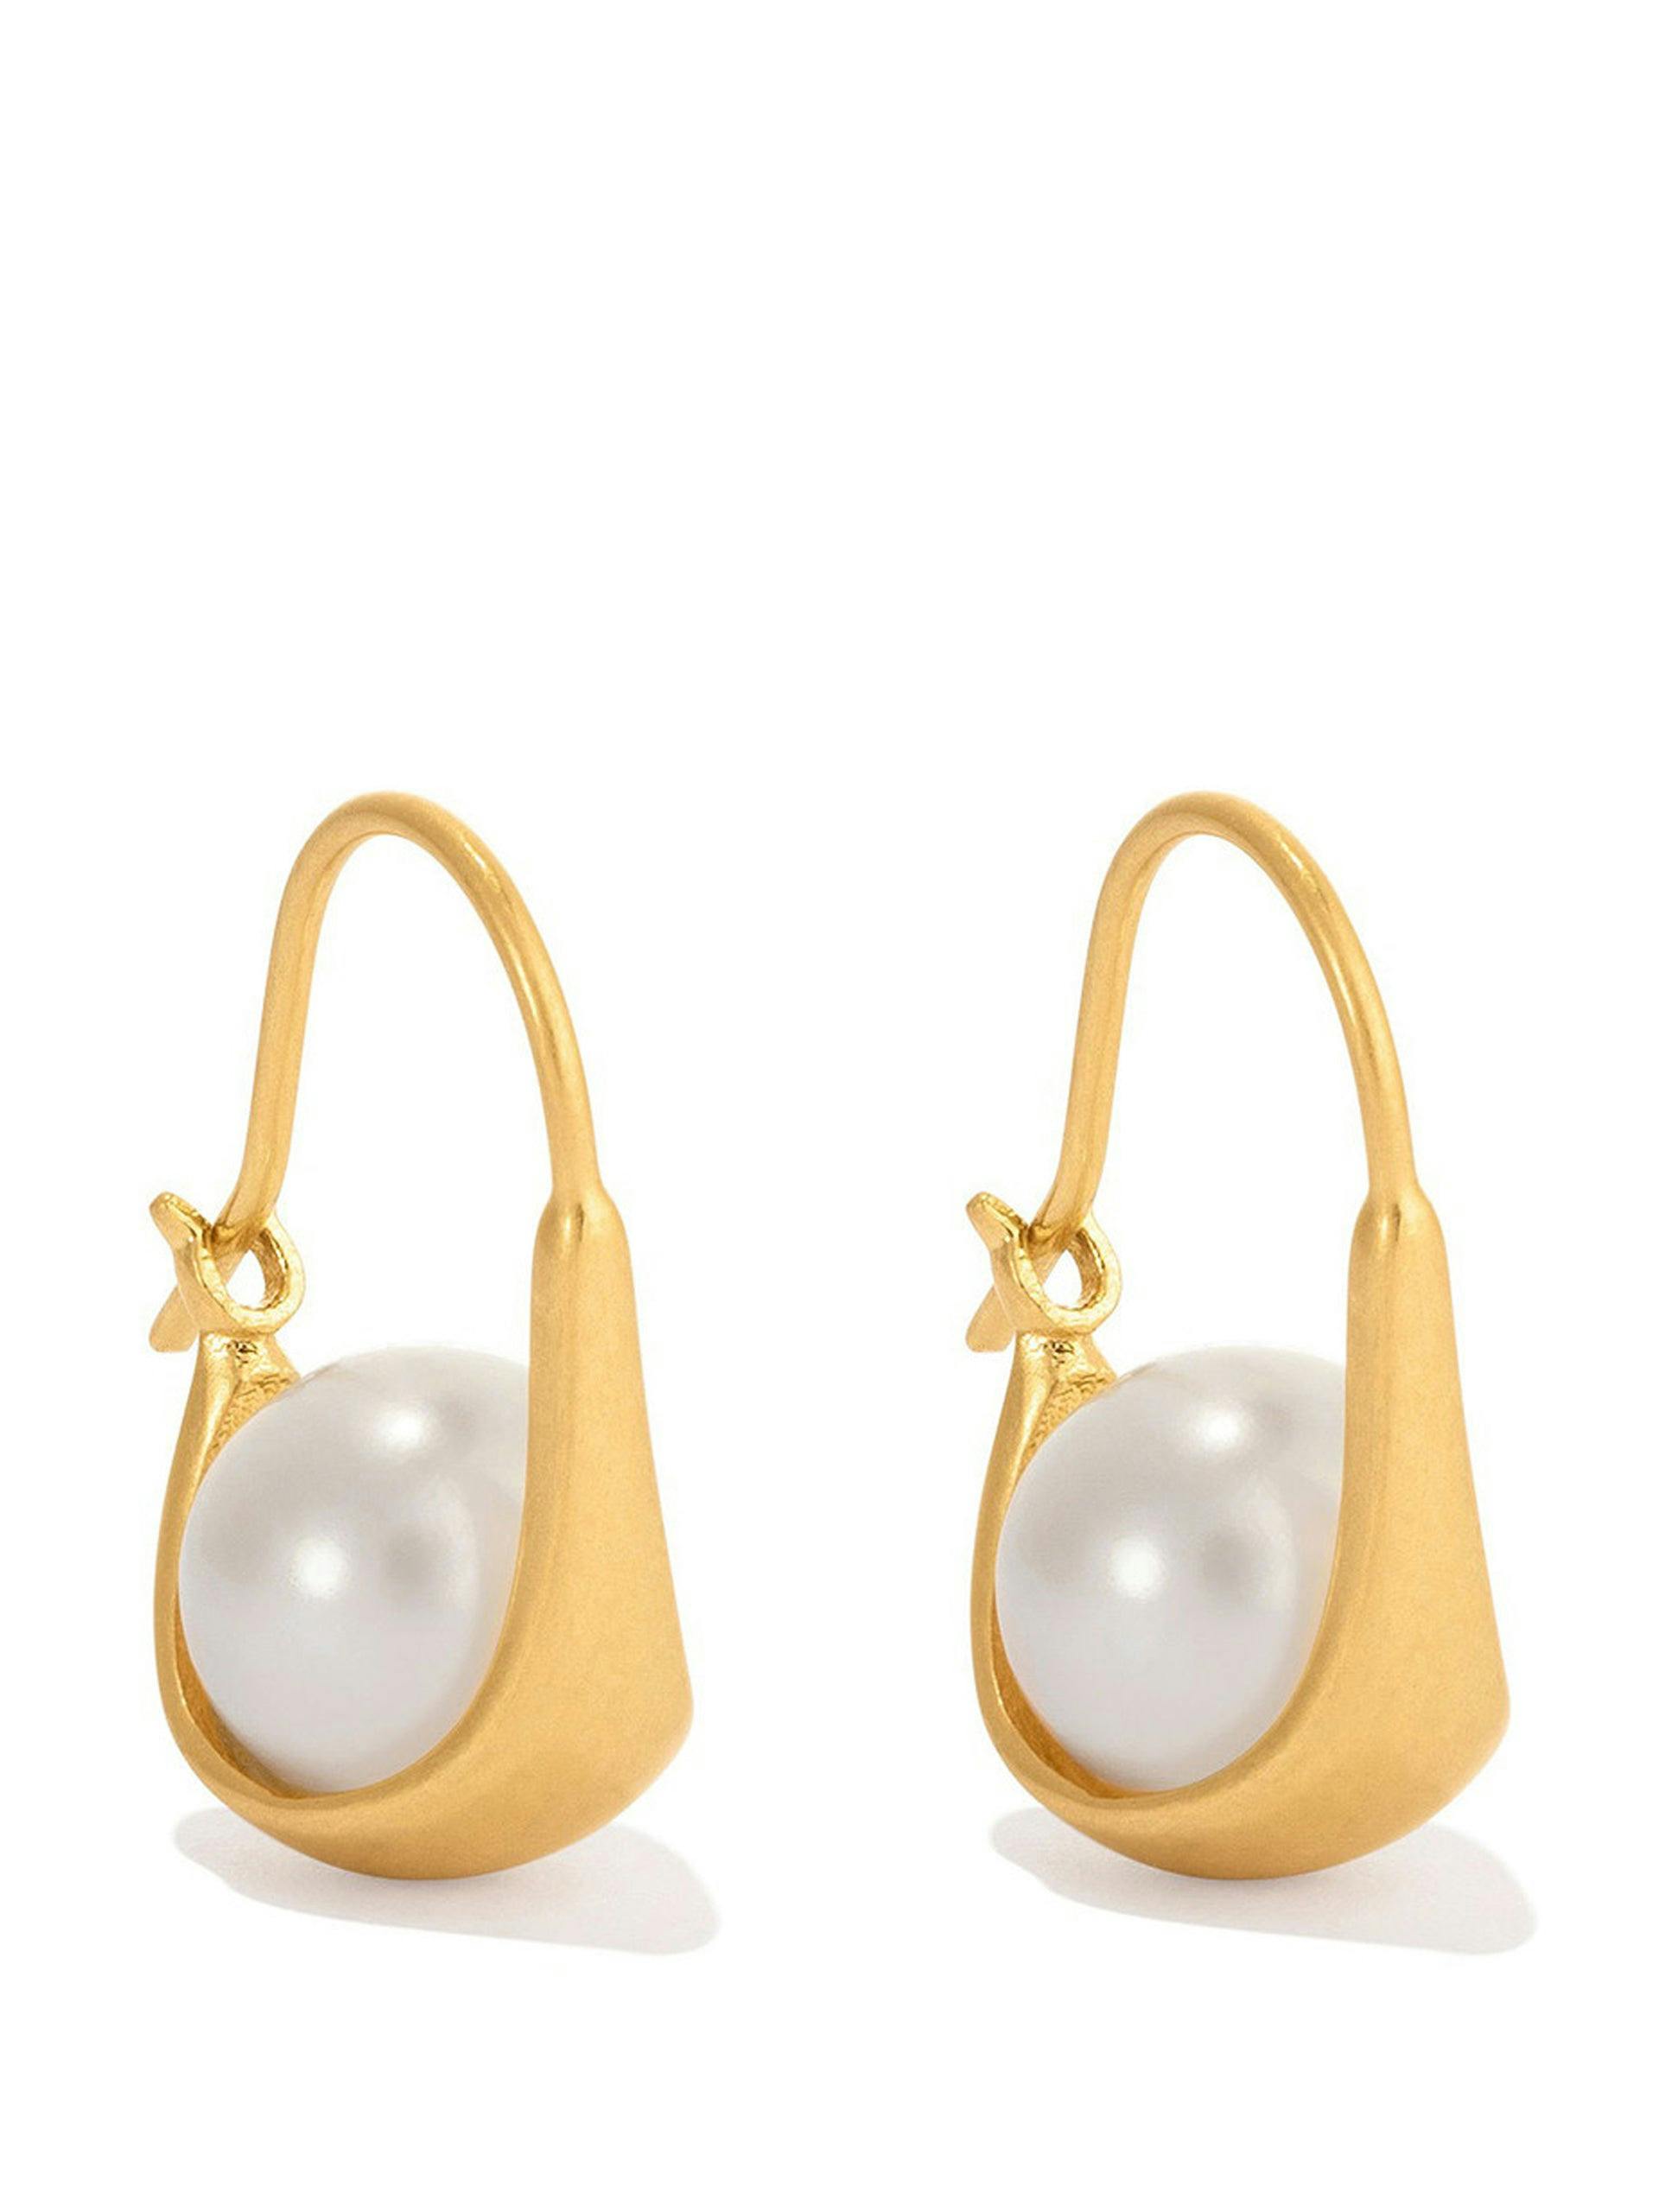 Jaclyn earrings in gold and white